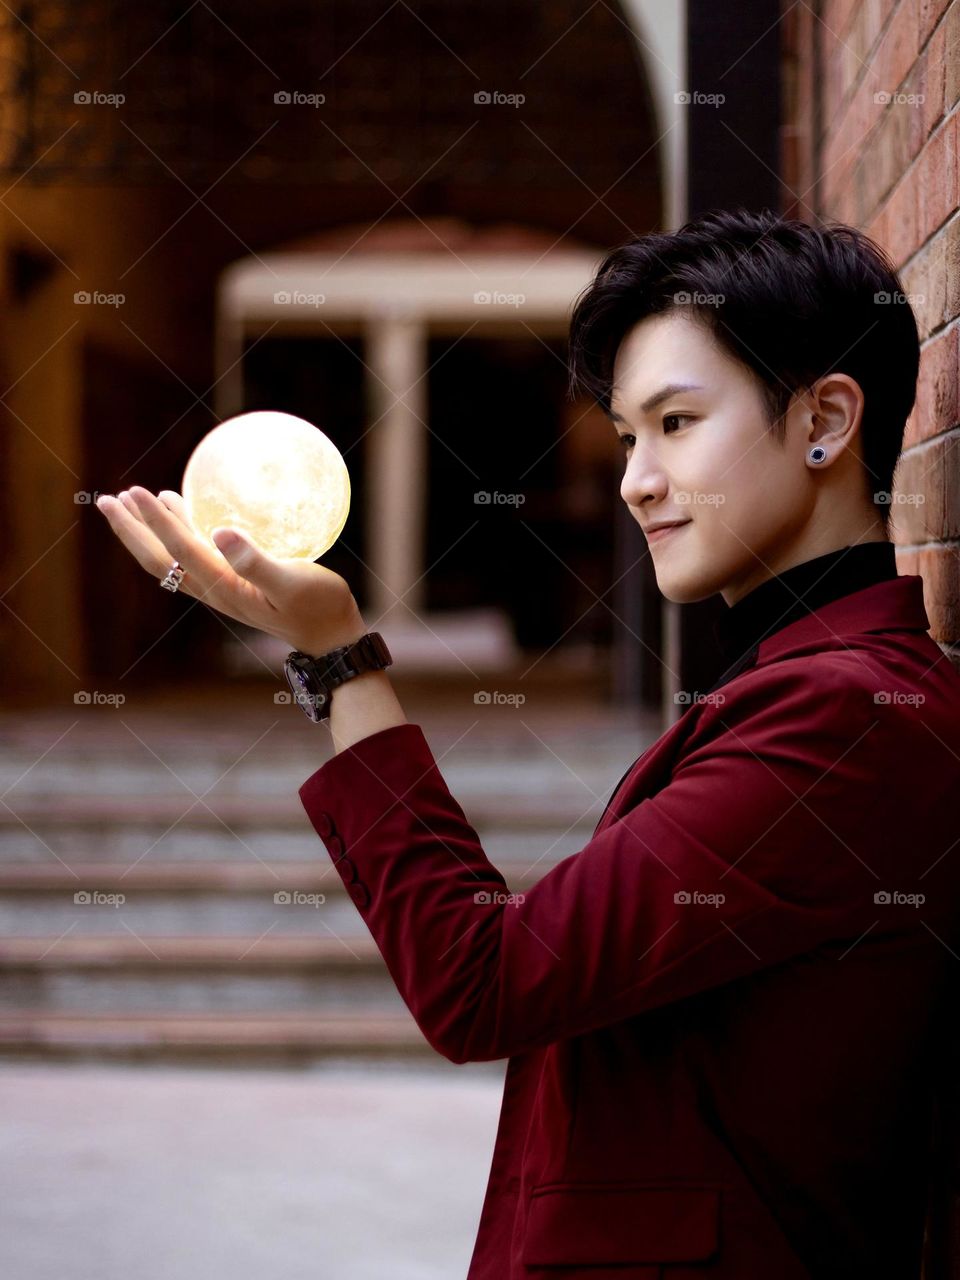 This is a picture with a young Hong Kong man in red blazer, holding a full moon model in his hand, showing the way how Chinese treats Mid-Autumn Festival. Also showing the colors of autumn!